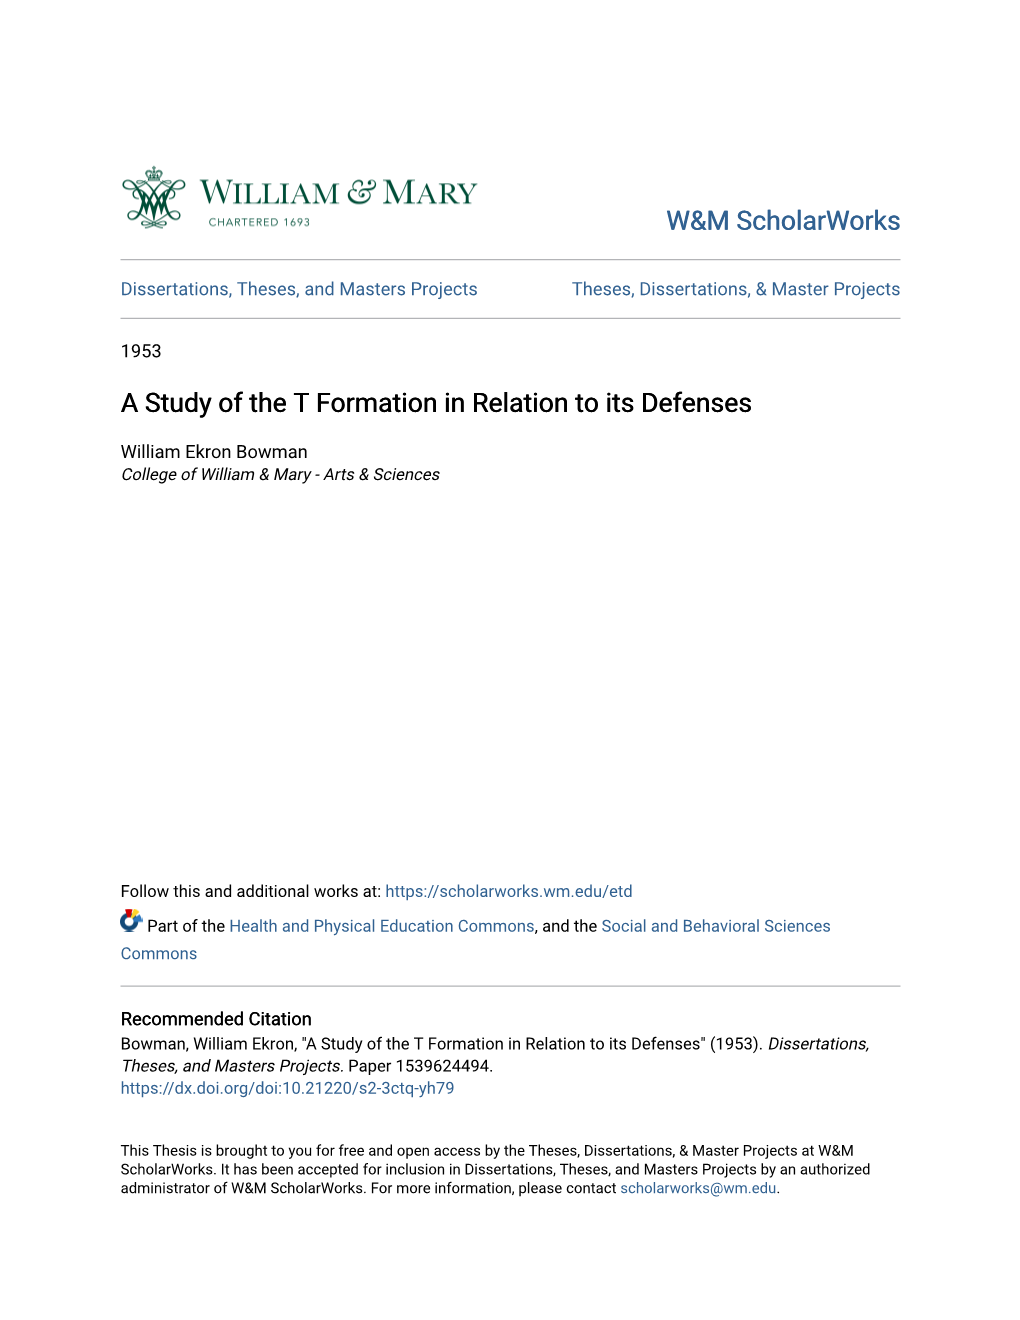 A Study of the T Formation in Relation to Its Defenses